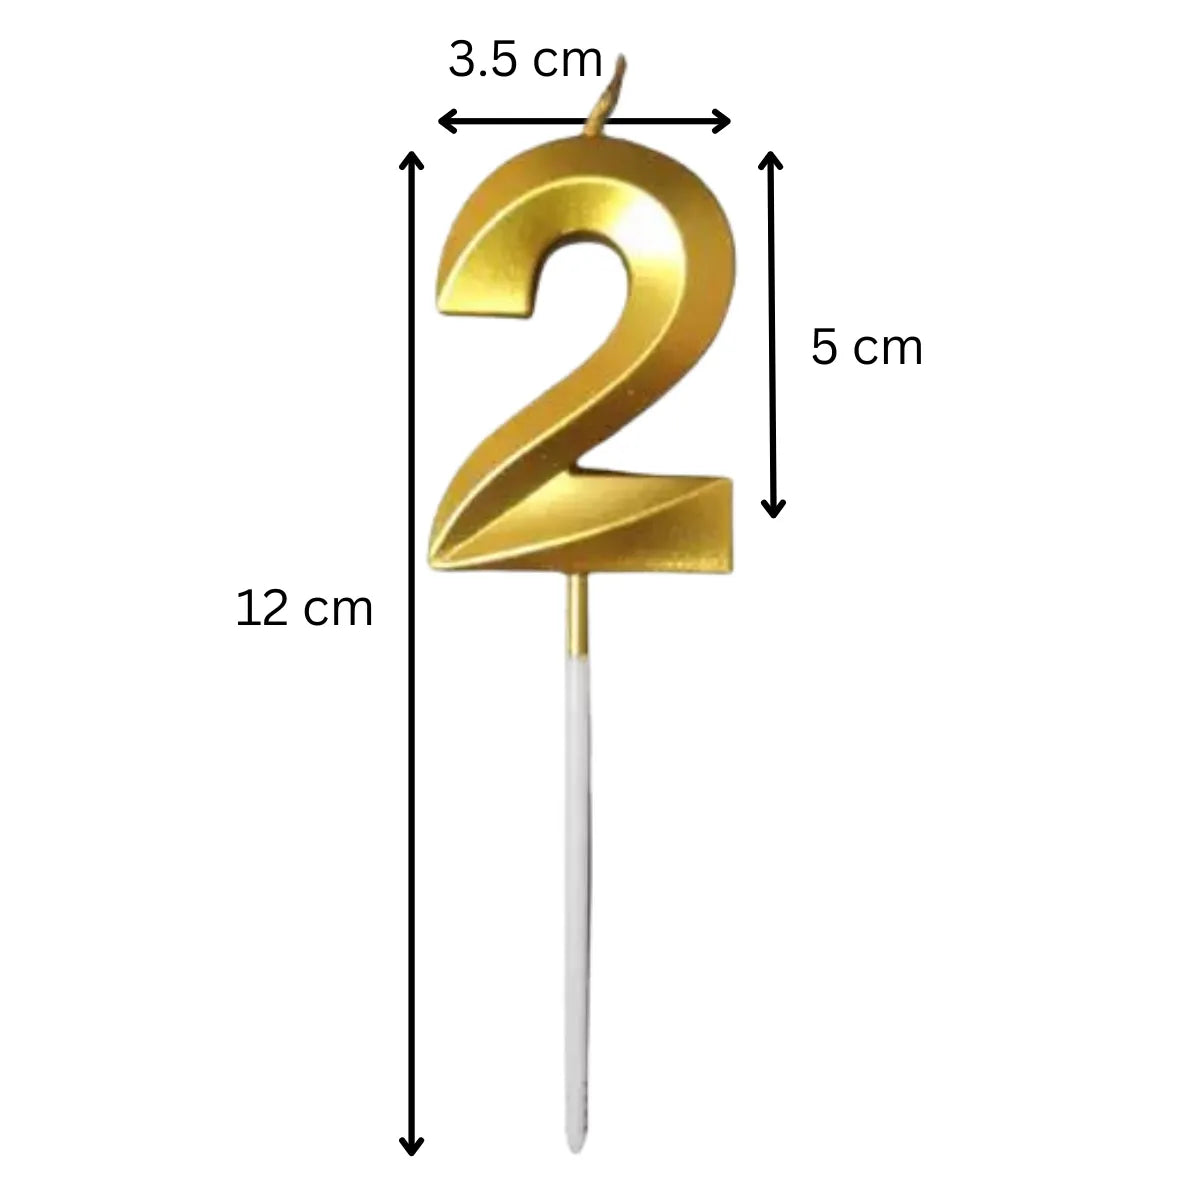 2 Two Golden Number Candle - thebakingtools.com